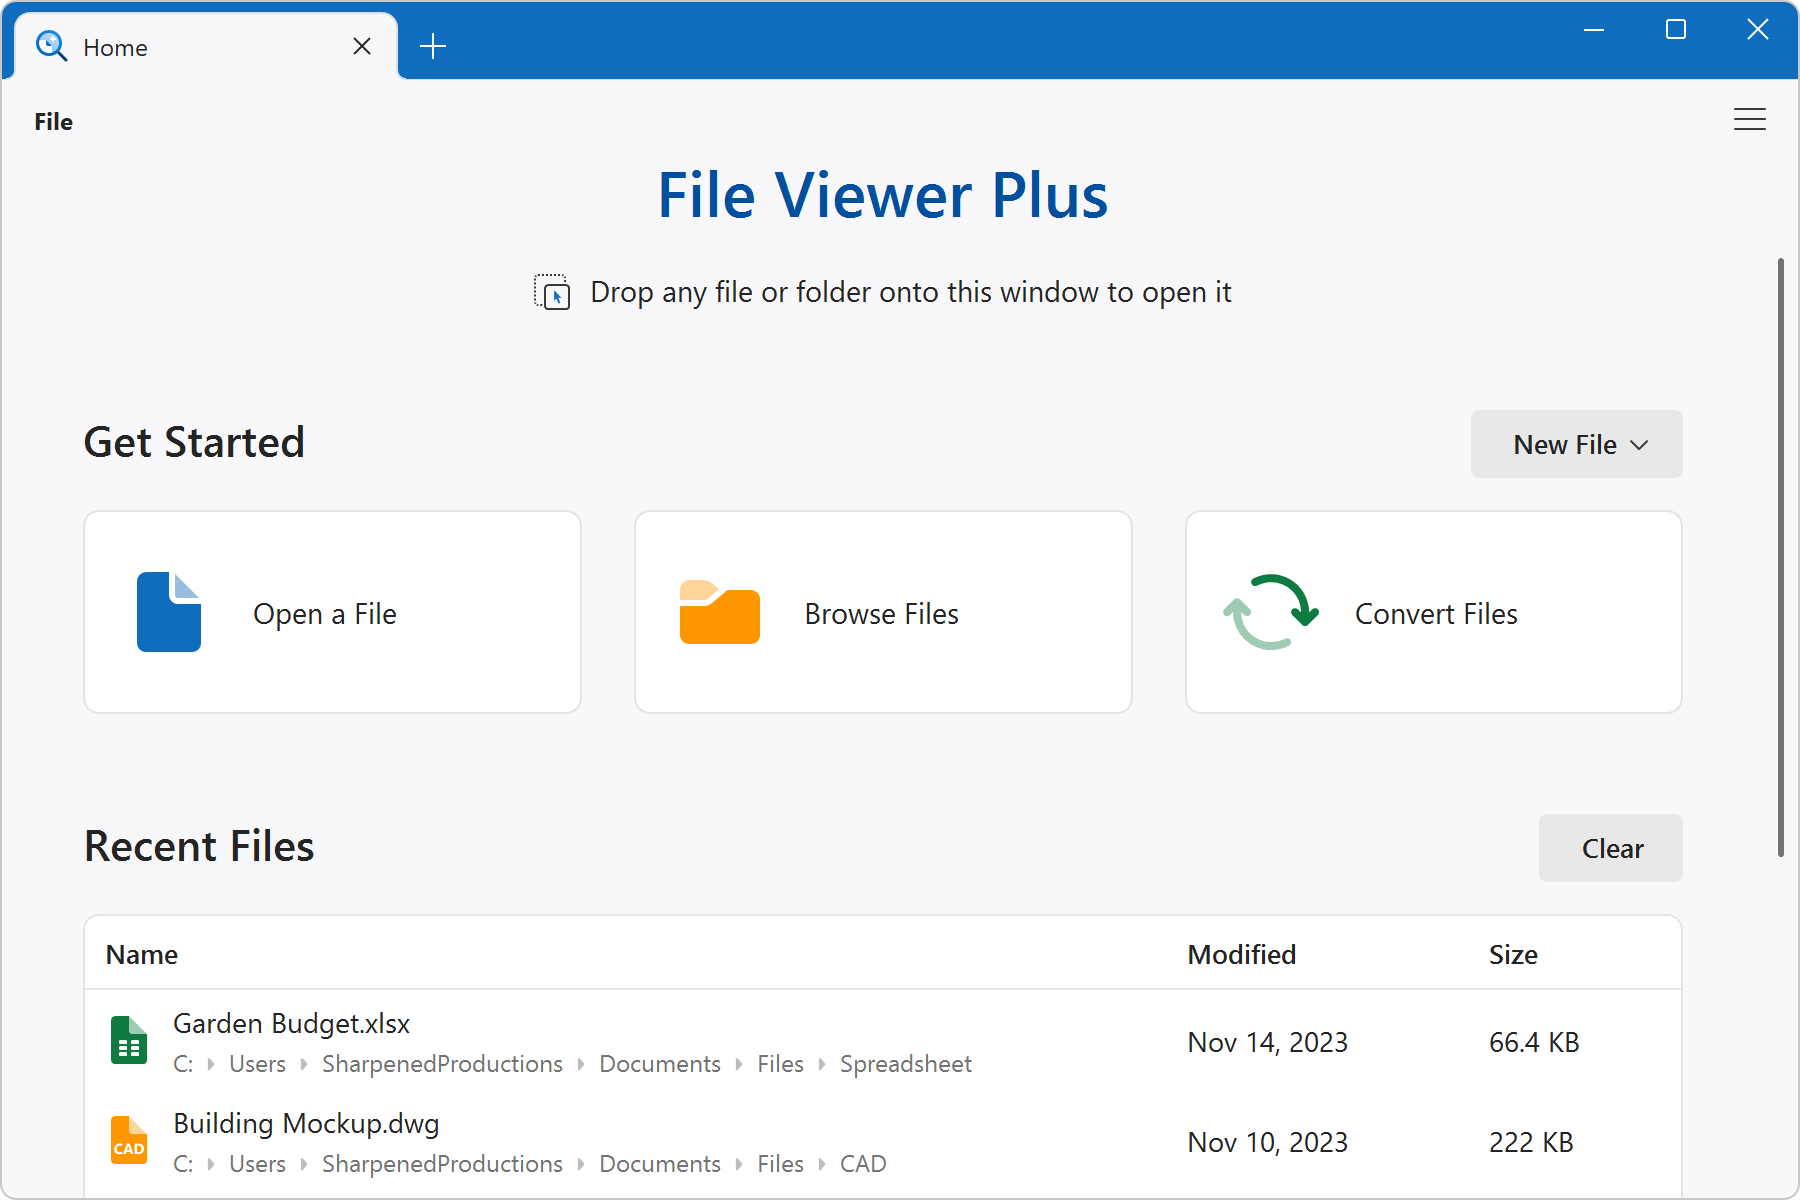 File Viewer Plus Home View